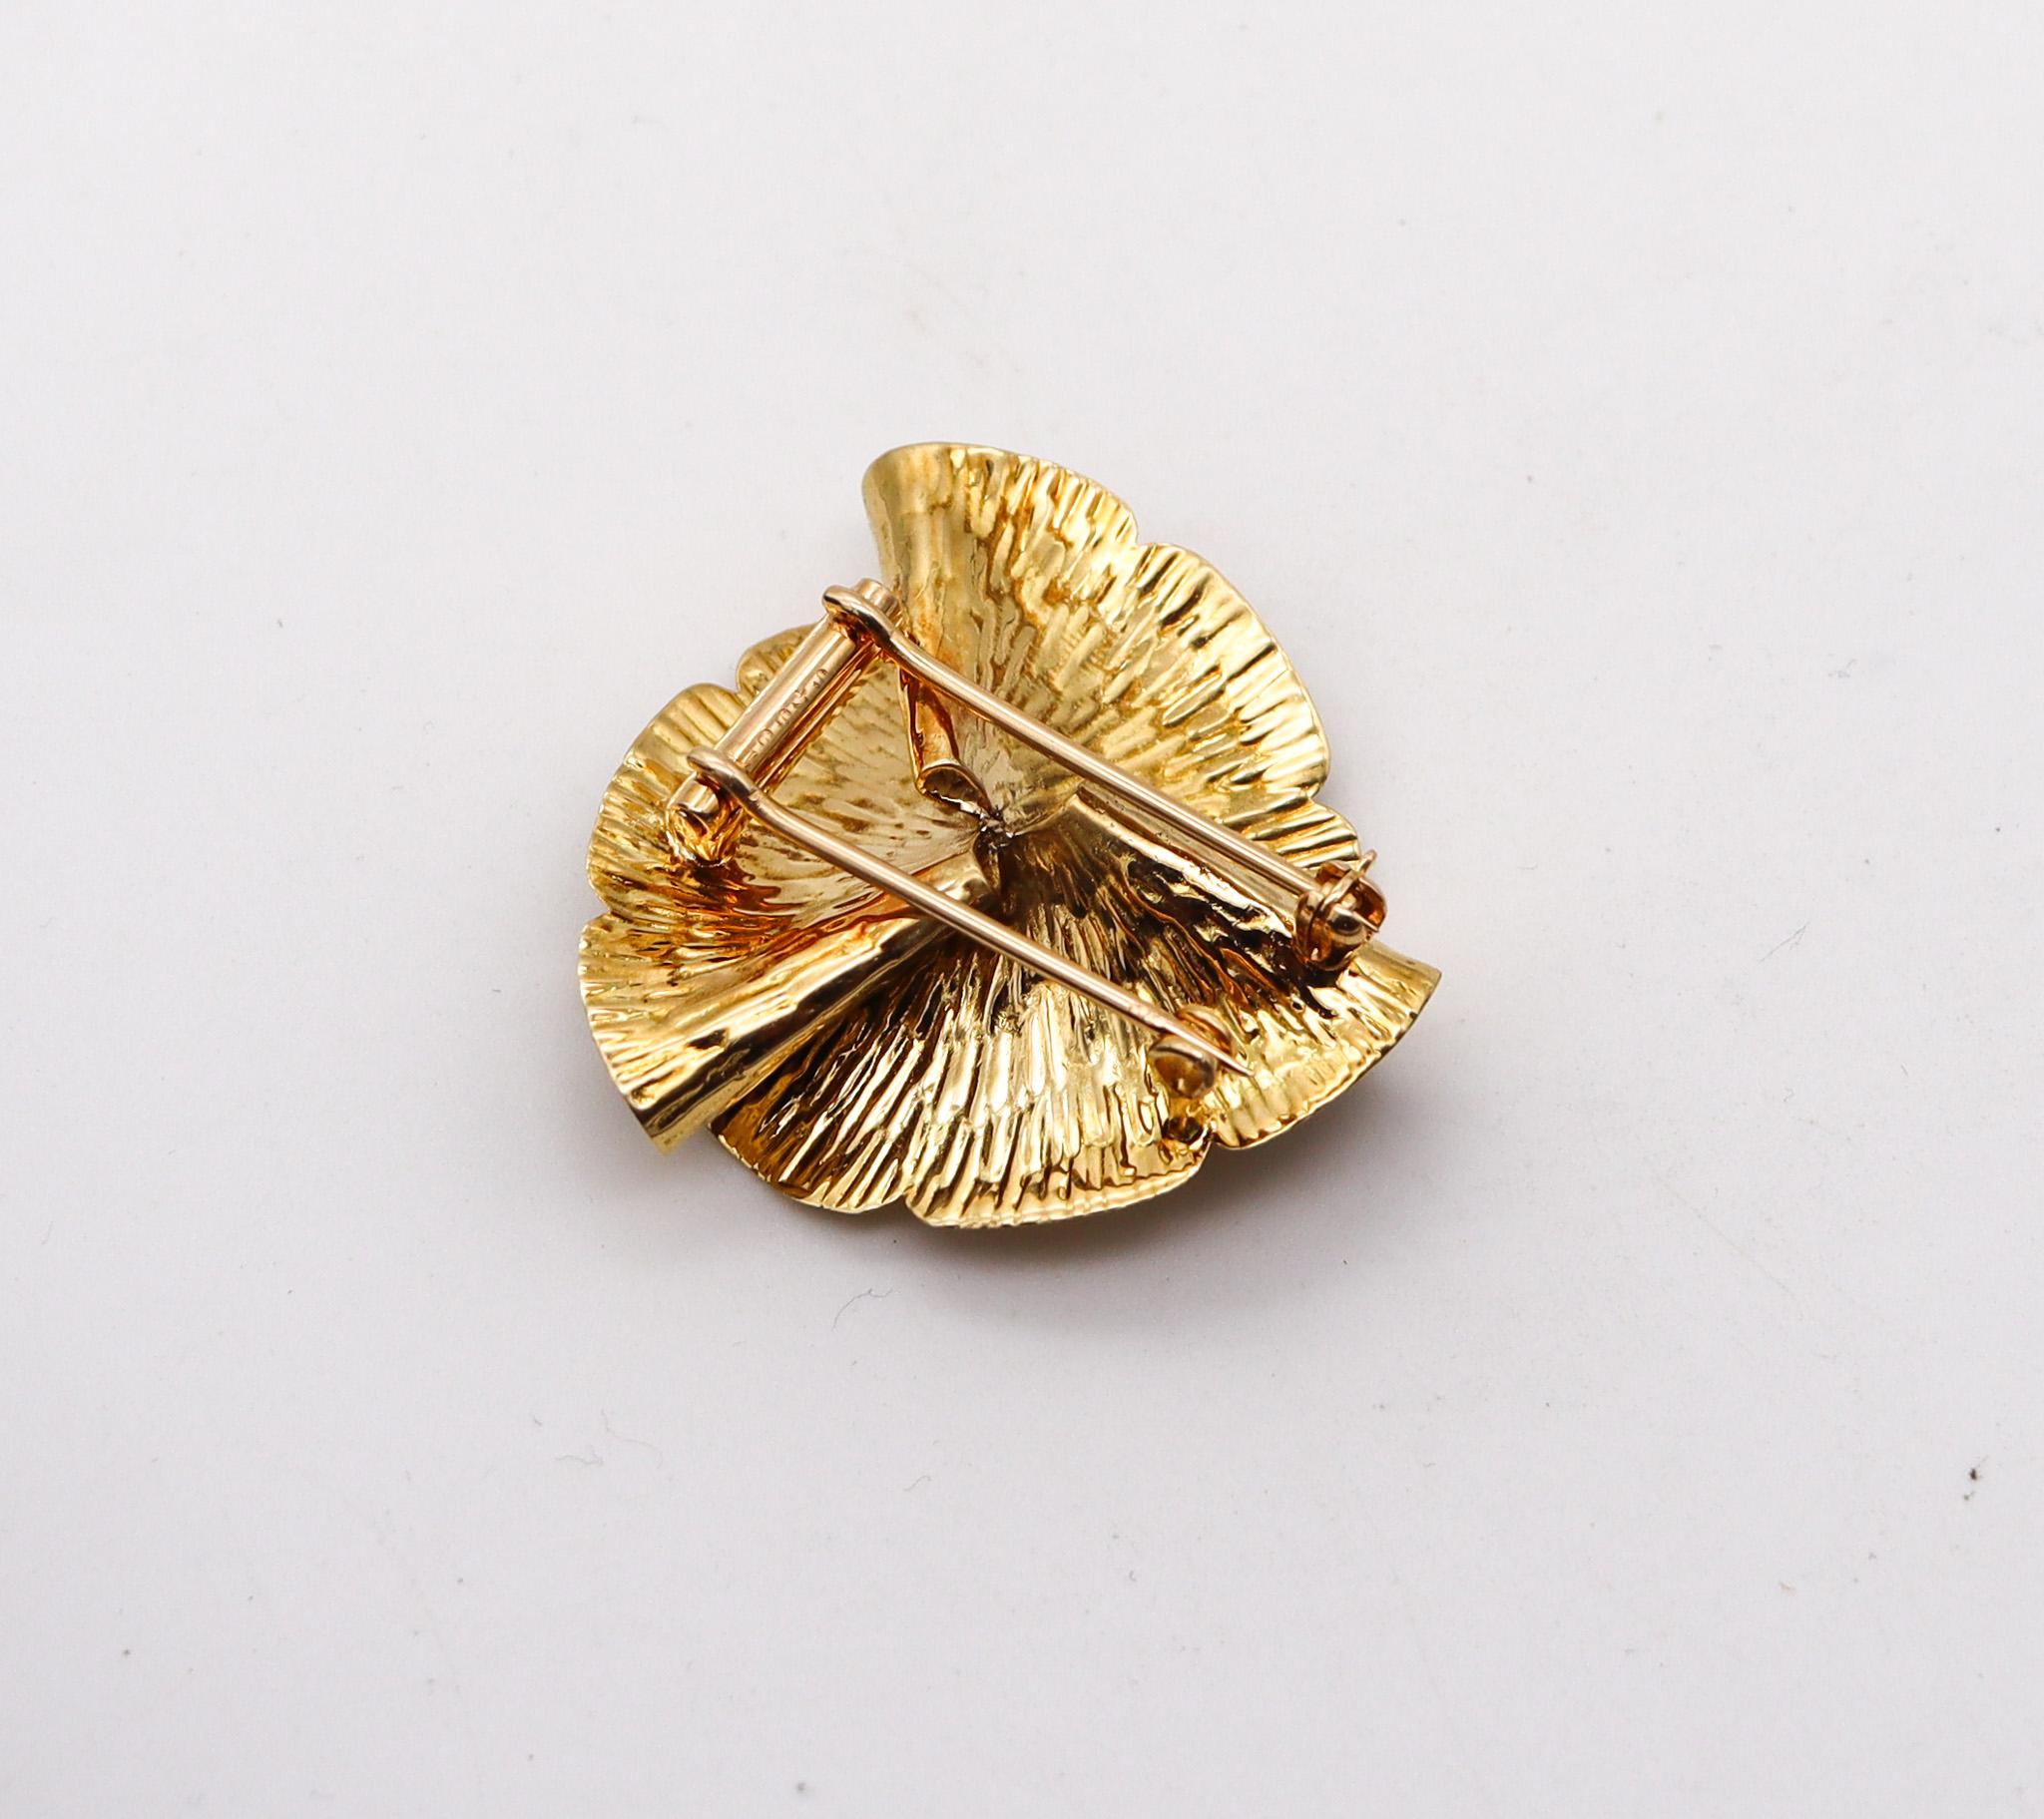 Brilliant Cut Cartier 1960 Organic Brooch In Textured 18Kt Yellow Gold With One Diamond For Sale